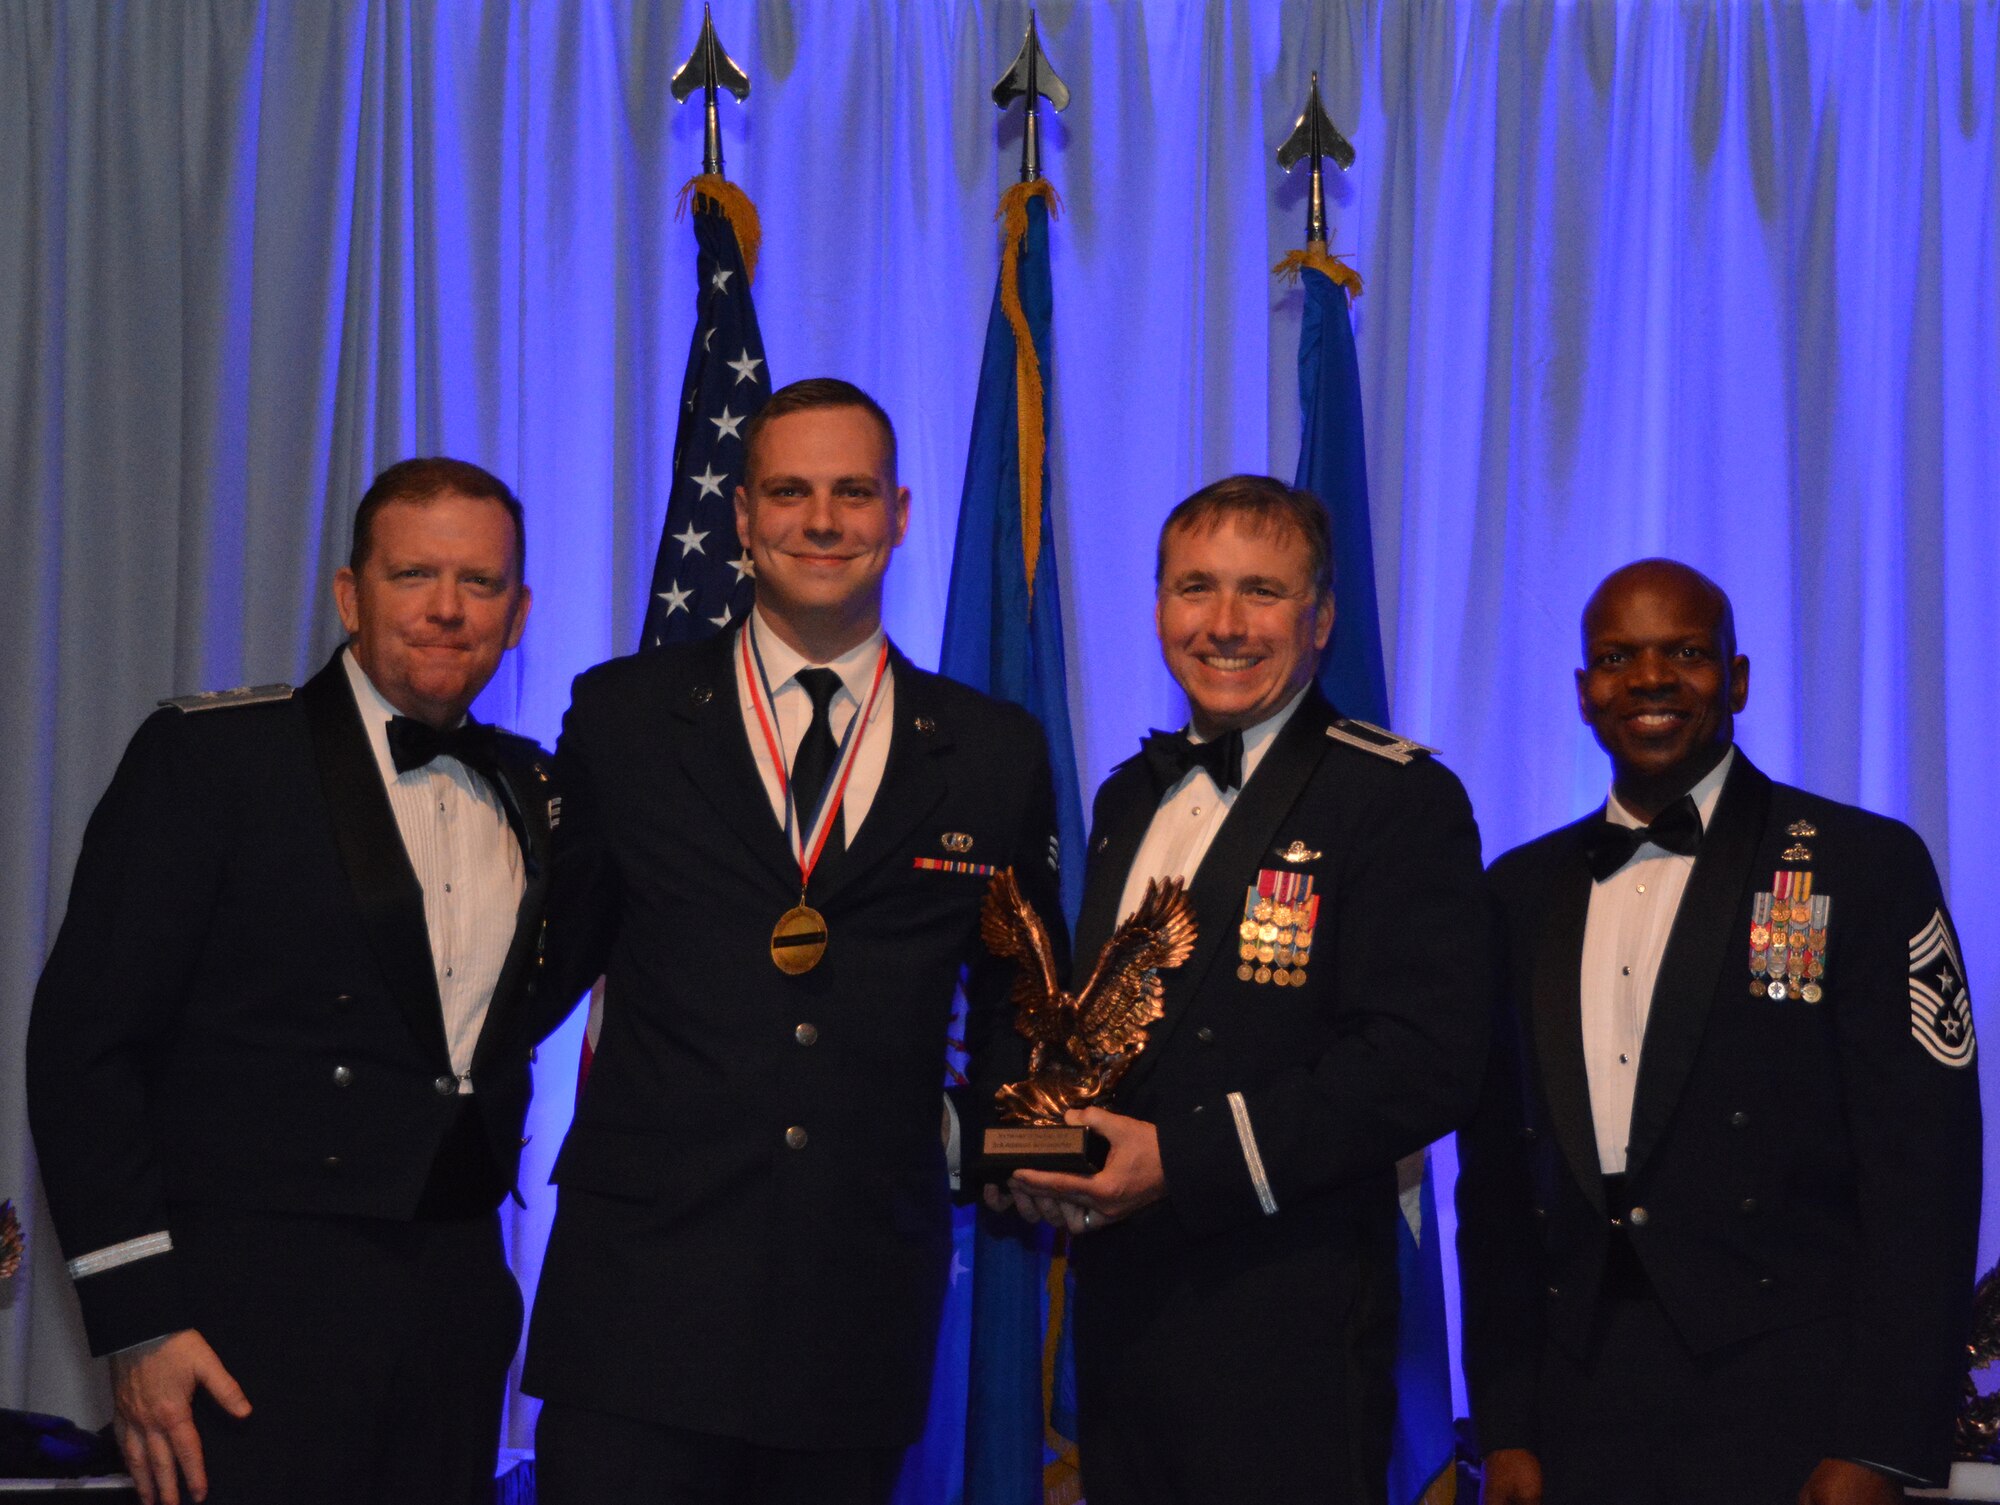 NAVAL AIR STATION FORT WORTH JOINT RESERVE BASE, Texas – Senior Airman Addison Schumacher, 301st Operations Support Flight technician, accepts the 2015 Airman of the Year award from Col. John Breazeale, 301st Fighter Wing commander, Feb. 20 at the Fort Worth Stockyards, Texas. An awards banquet, organized annually, honored nominees and winners in 10 categories for their commitment and devotion to the wing and U.S. Air Force Reserve. (U.S. Air Force photo by Staff Sgt. Samantha Mathison)